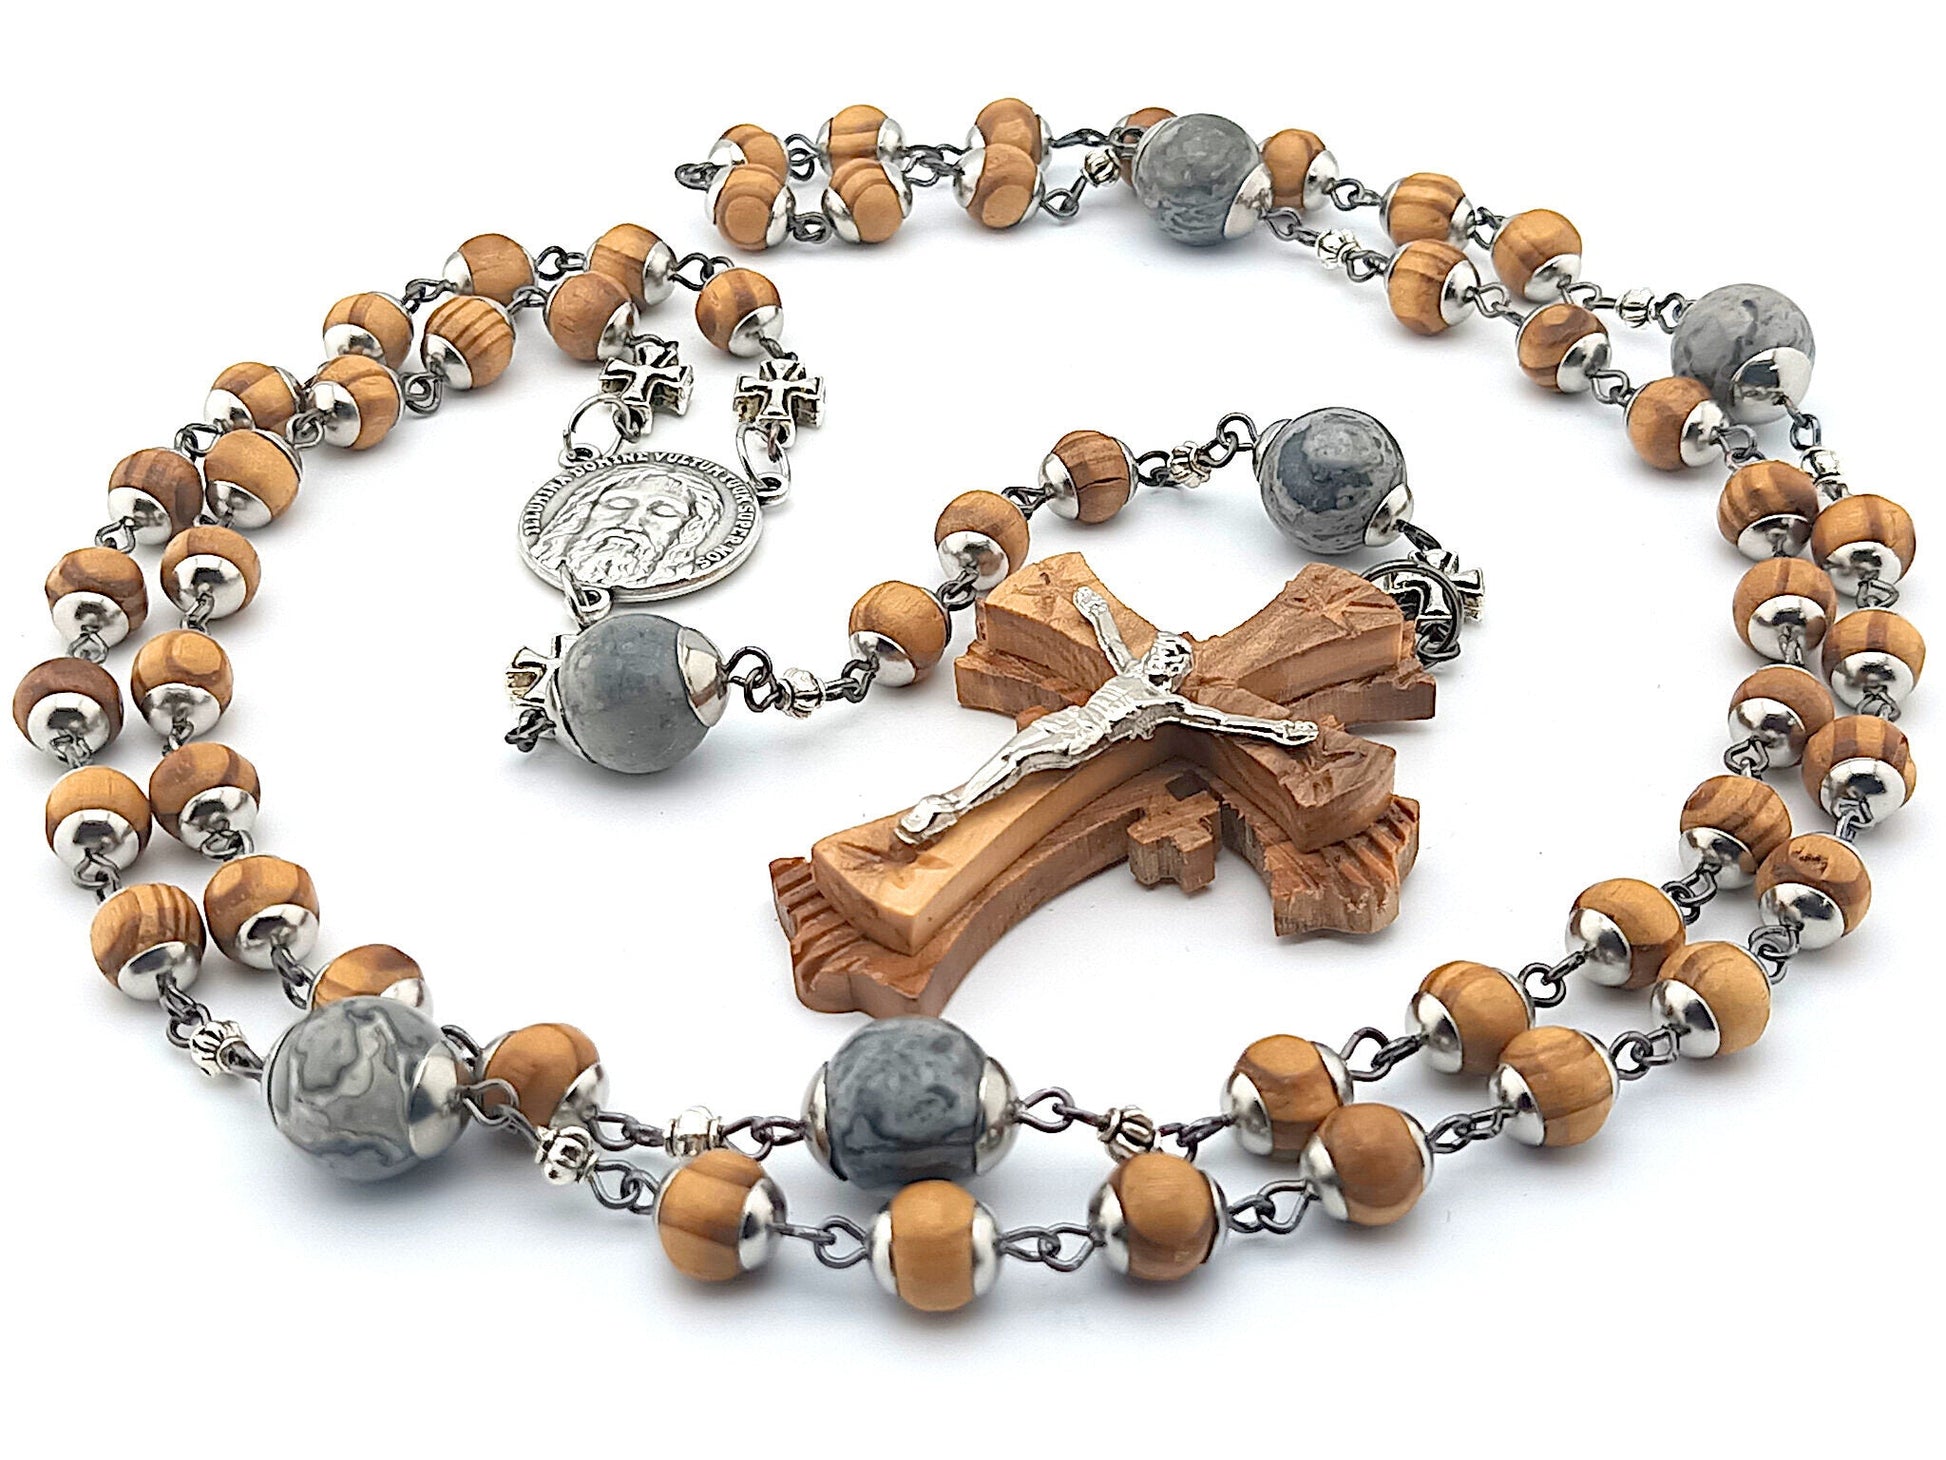 Holy Face of Jesus unique rosary beads with wooden beads and crucifix, stainless steel bead caps, and silver cross beads.